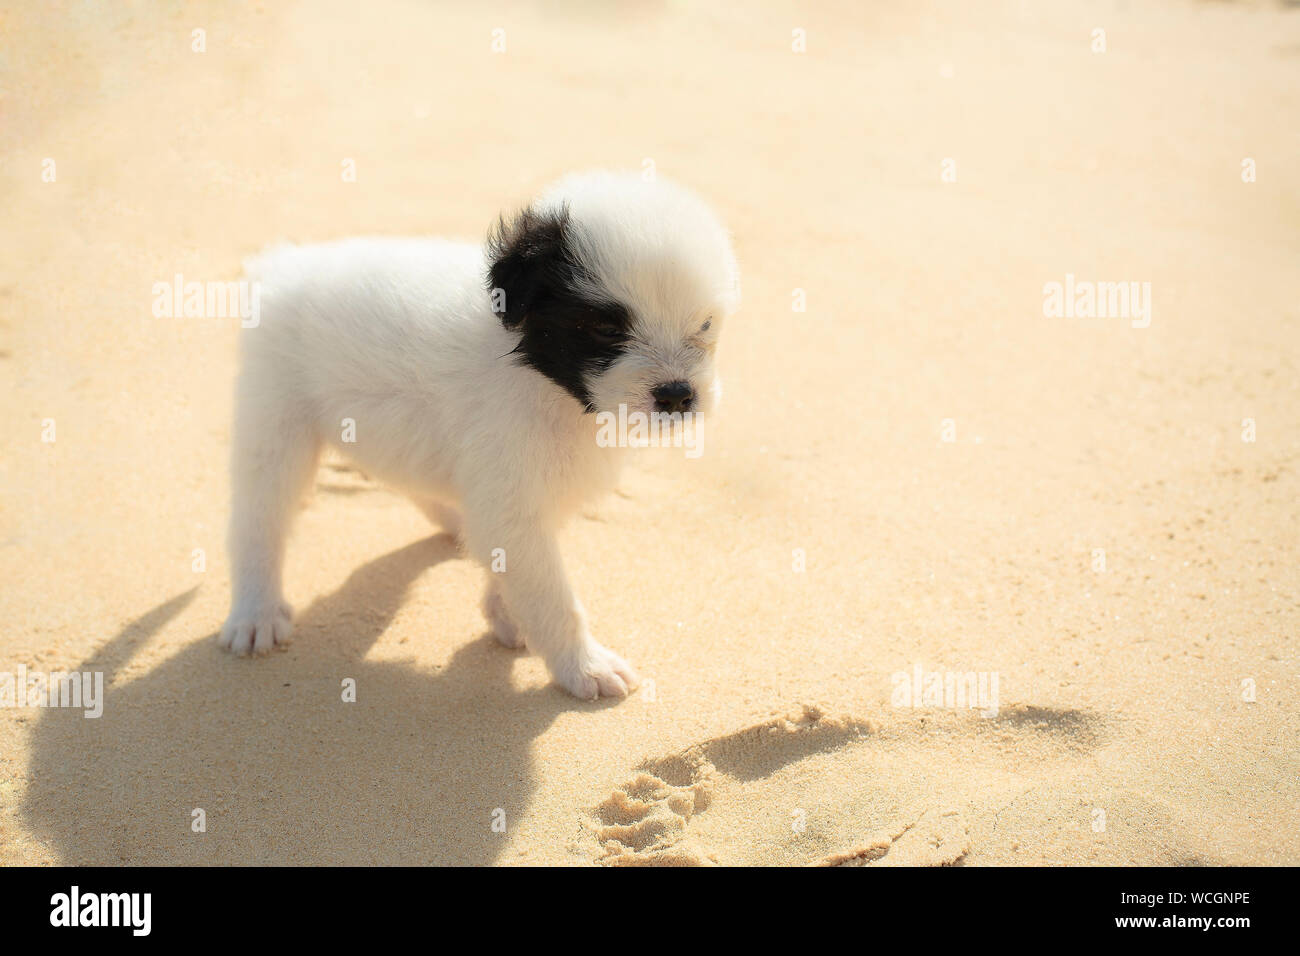 Close-up Of Puppy Walking On Beach Stock Photo